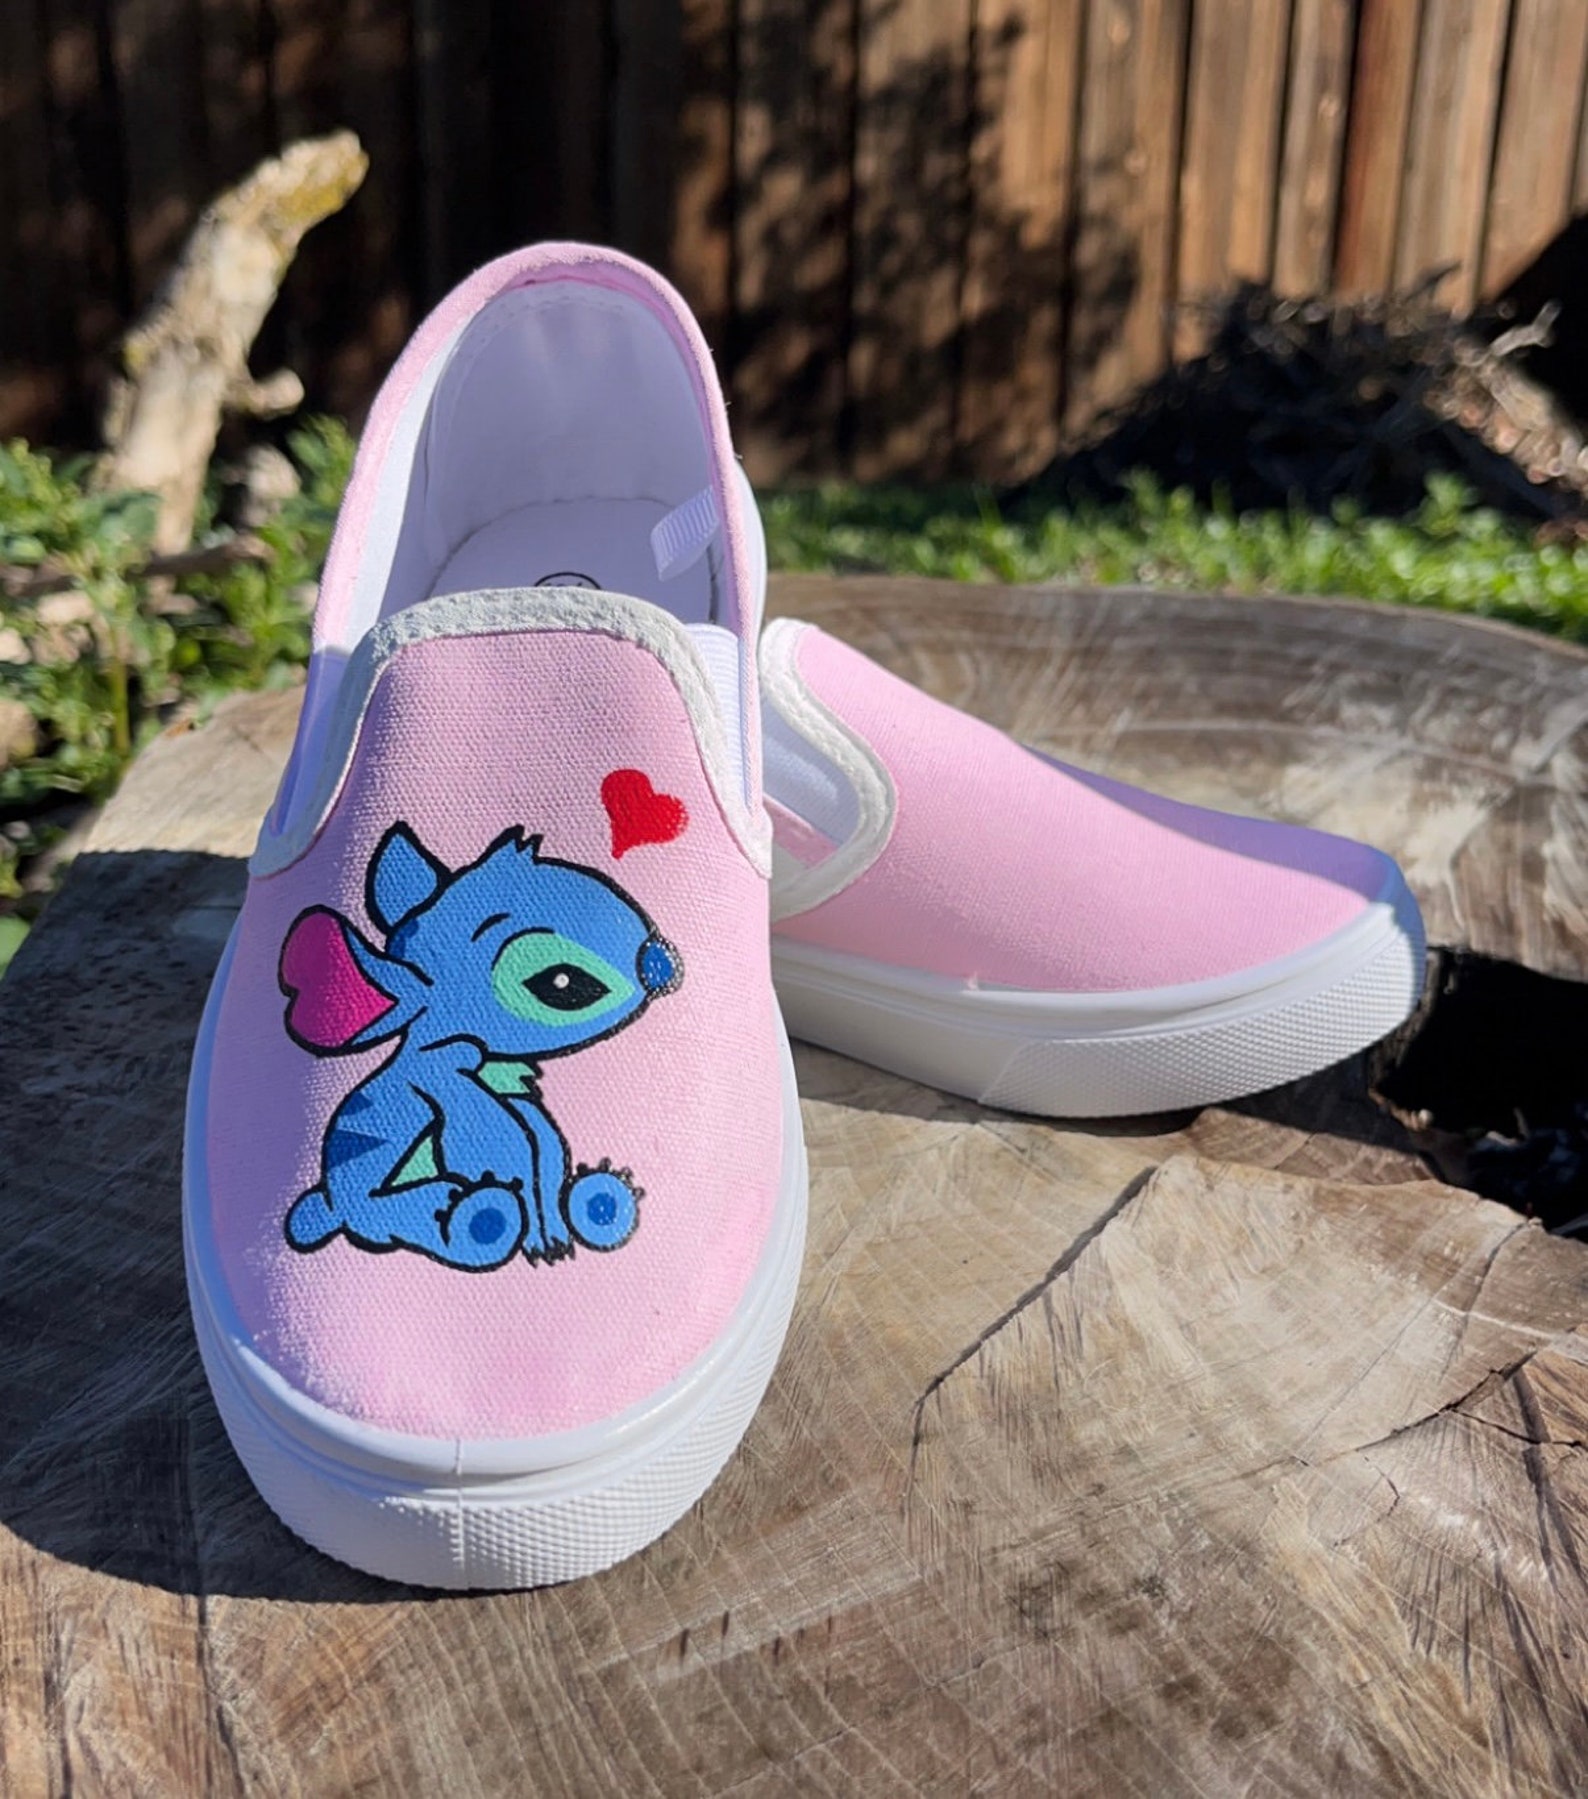 Stitch Hand Painted Canvas Shoes Kids - Etsy